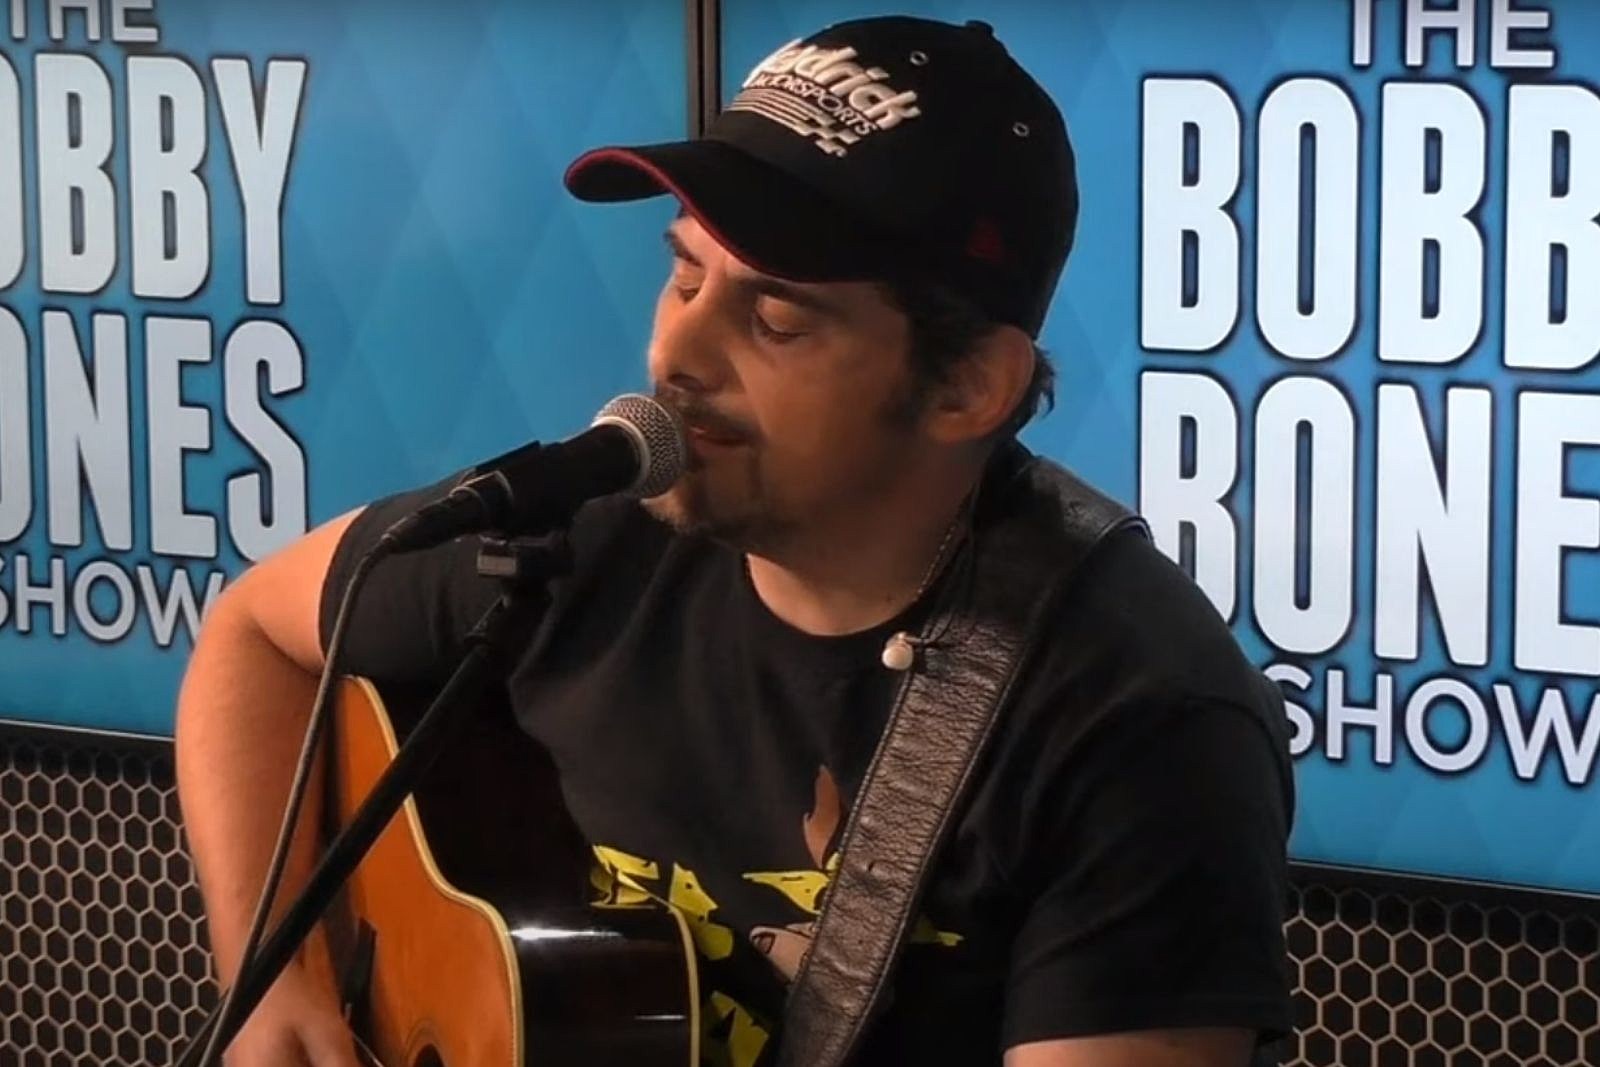 Brad Paisley Surprises Fan With Performance Of 'Then' For Wedding